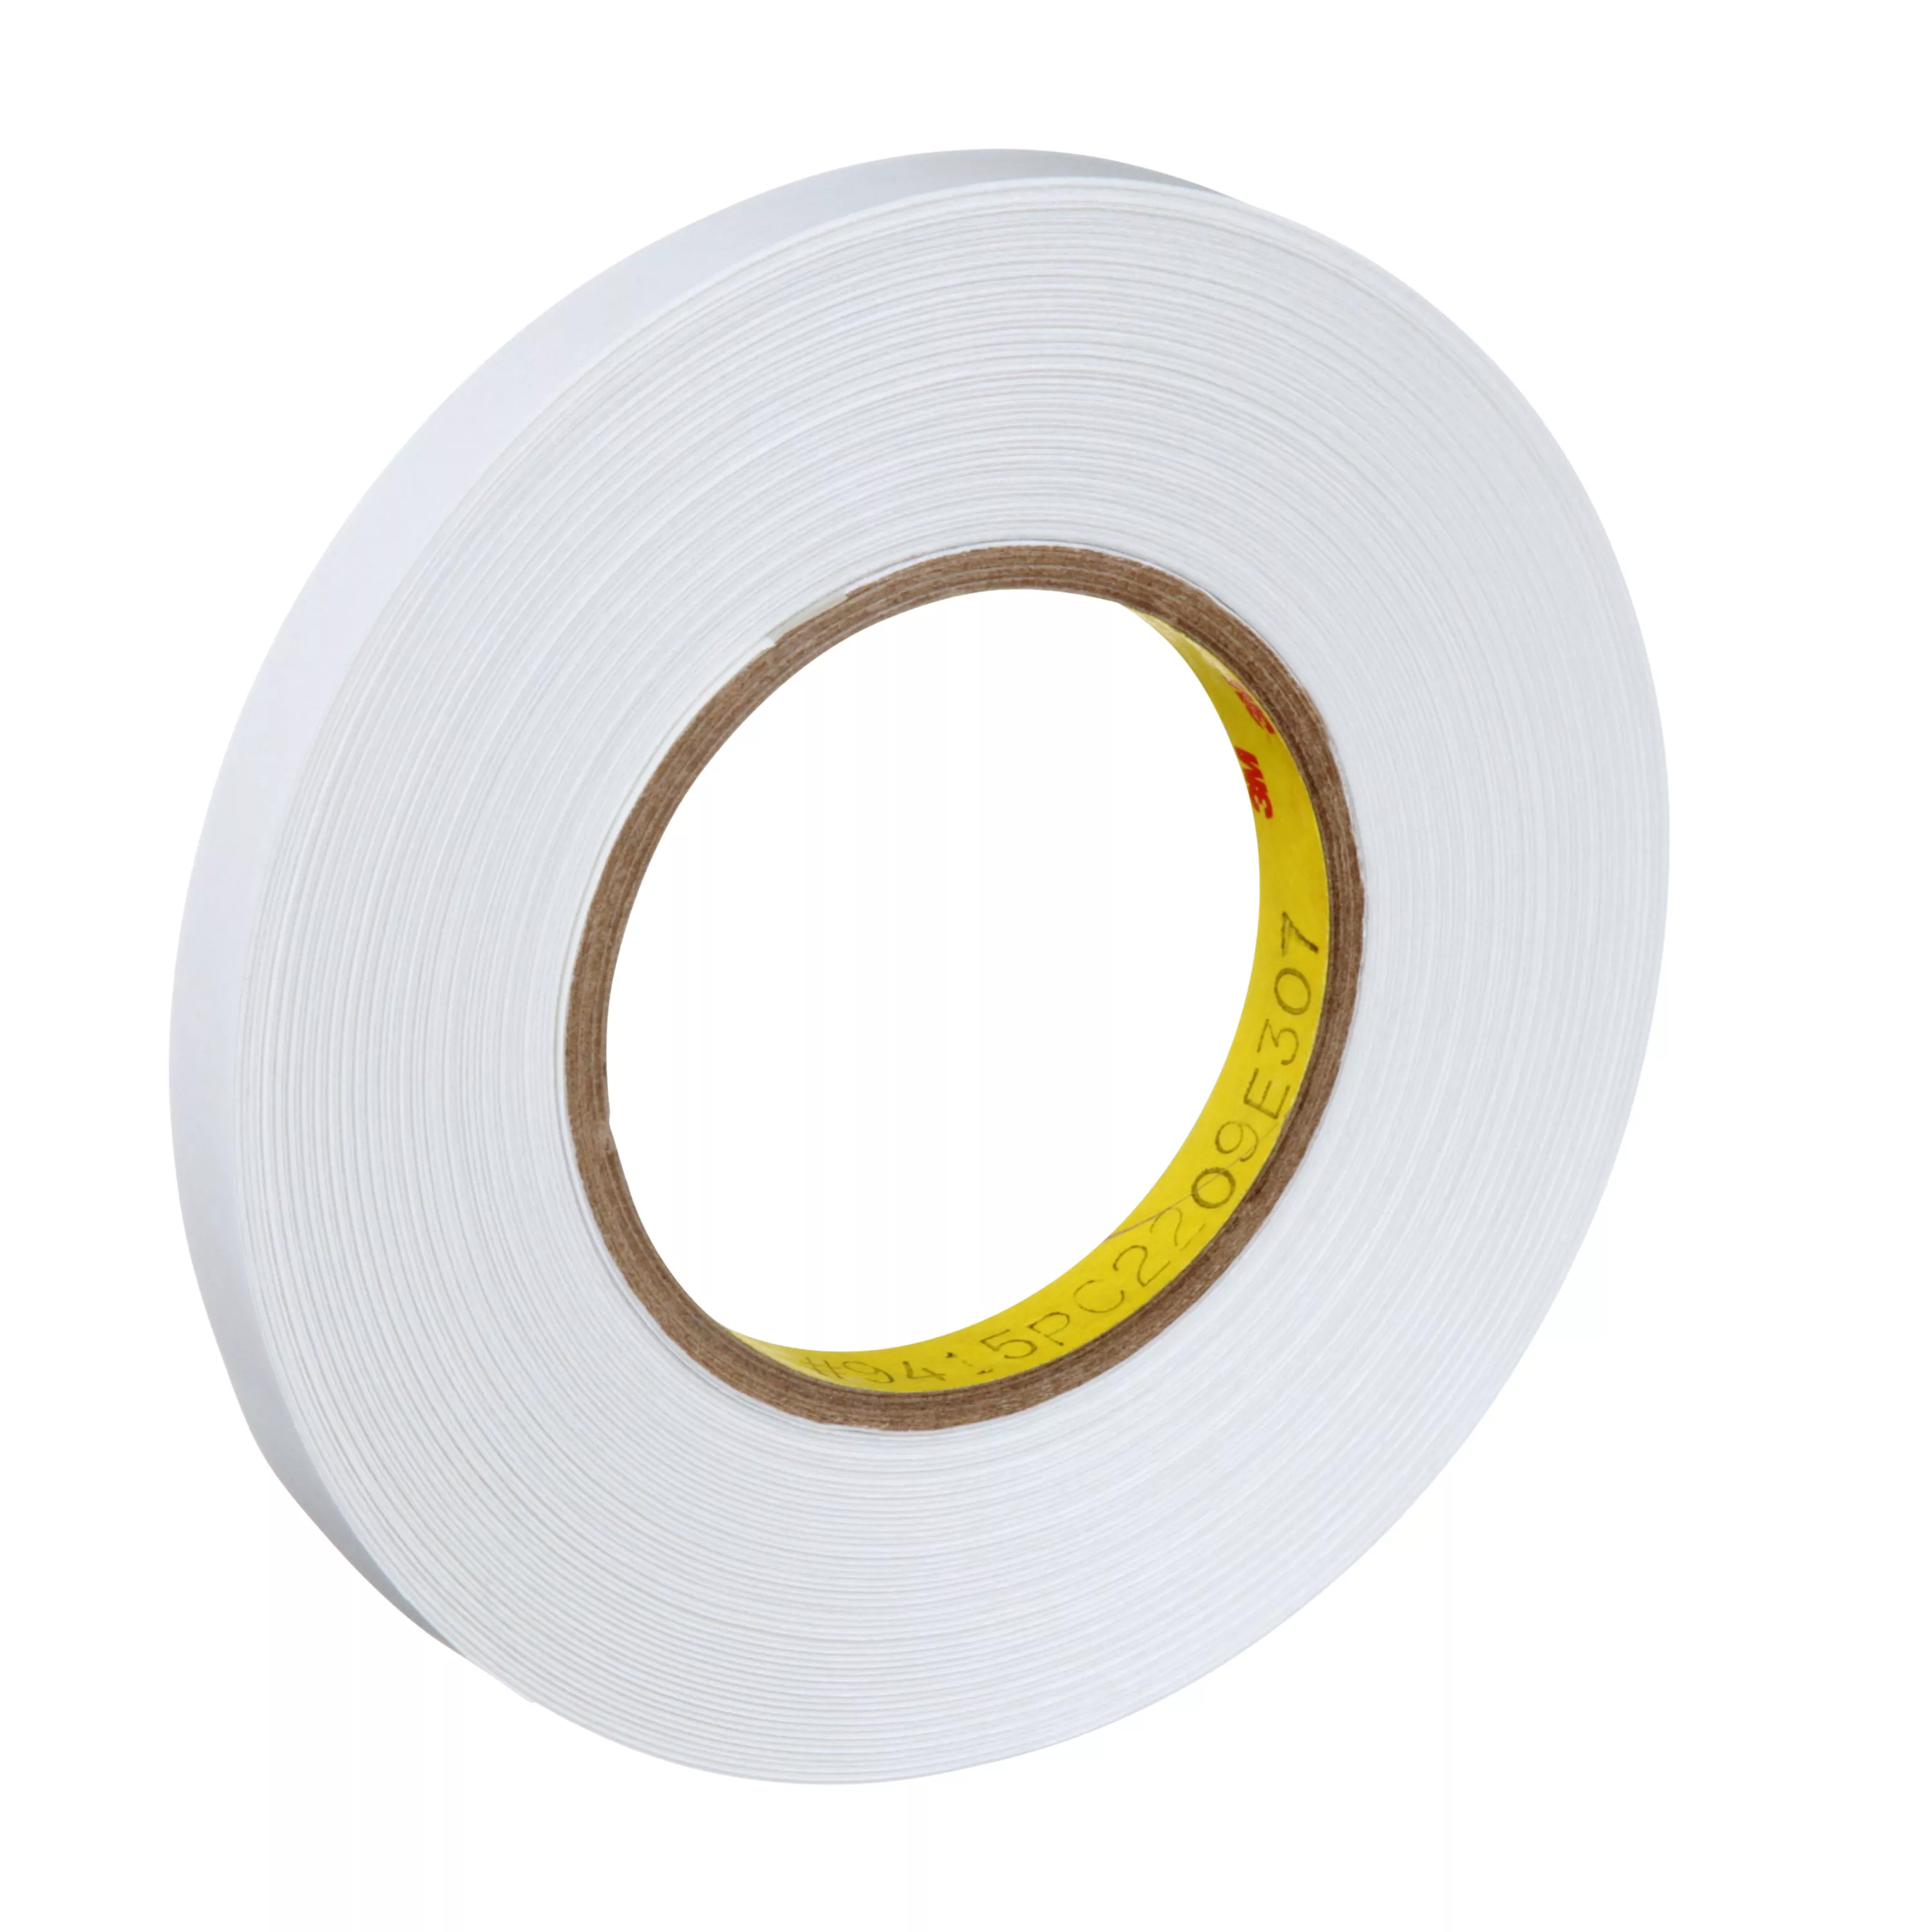 3M™ Removable Repositionable Tape 9415PC, Clear, 3/8 in x 72 yd, 2 mil,
96 rolls per case